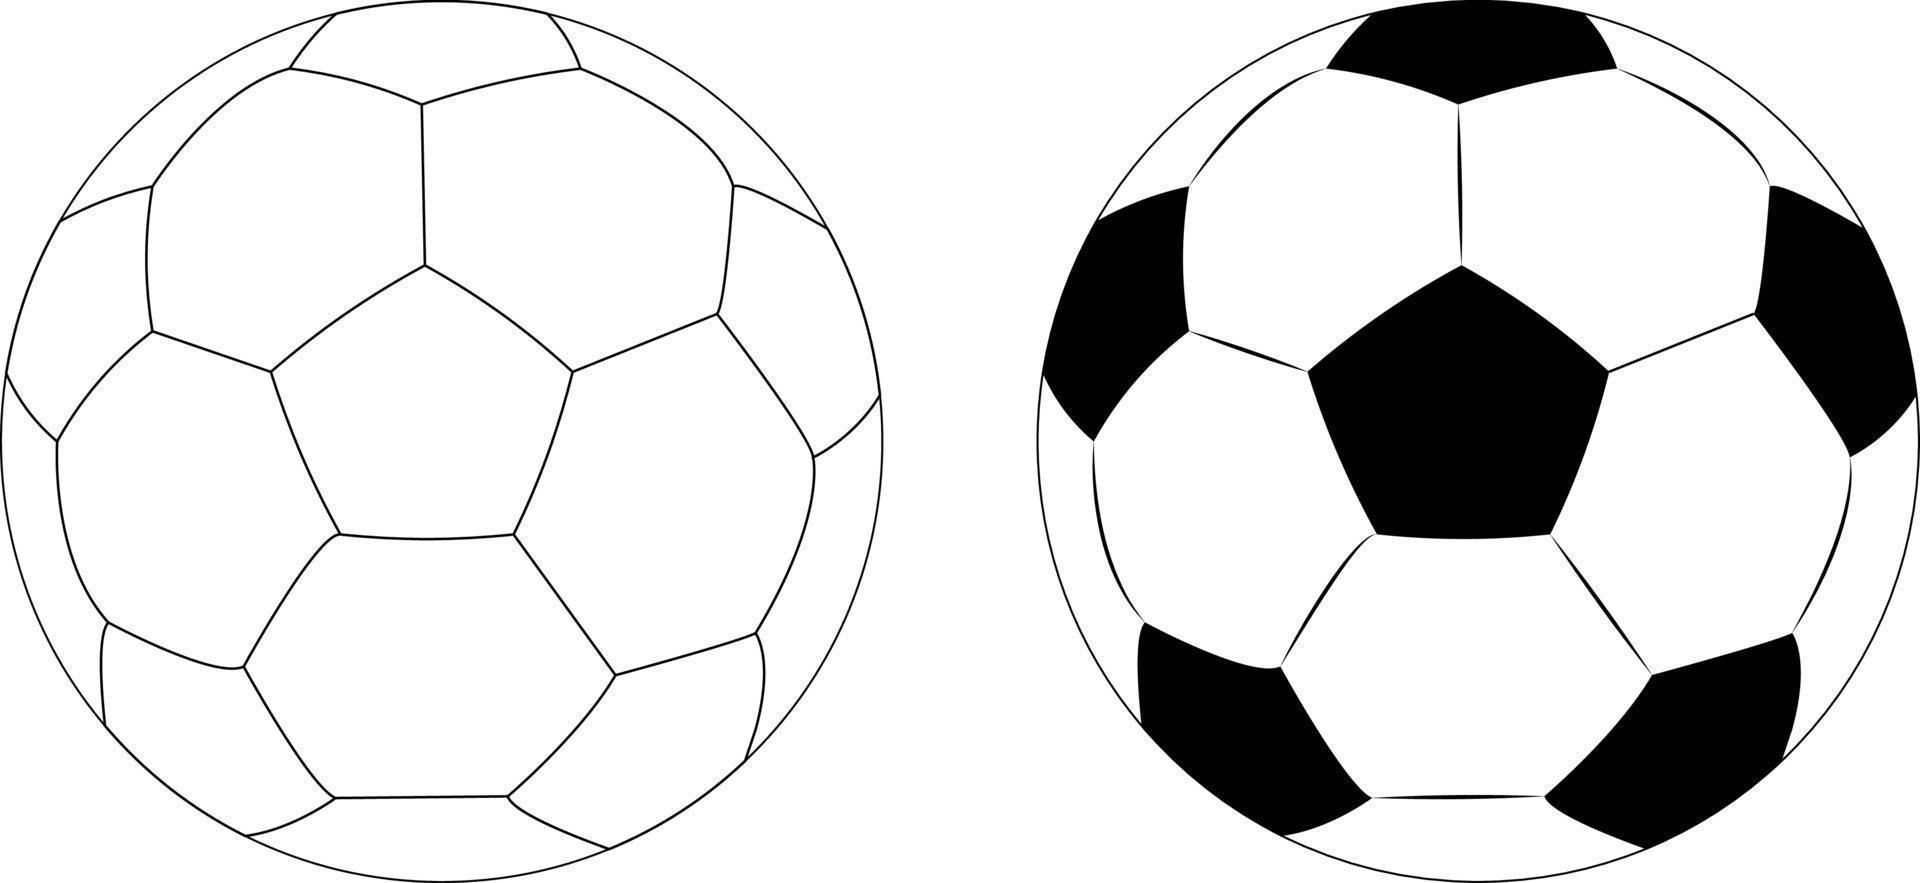 soccer ball icons in two styles ,football game sport for competition. Professional player object. Vector realistic illustration isolated on white transparent background.